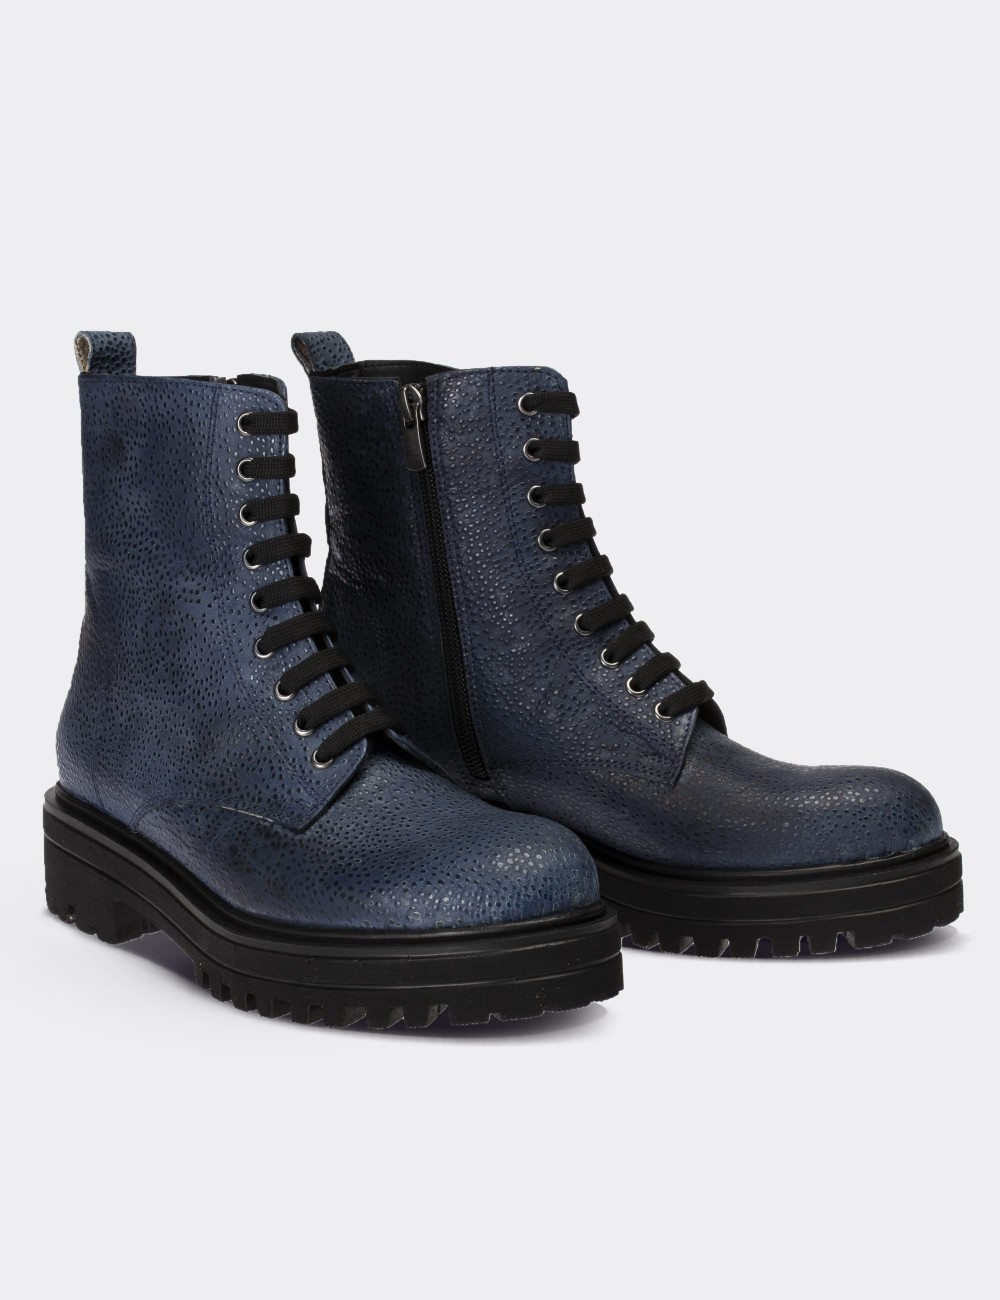 Blue  Leather Postal Boots - 01814ZMVIE11